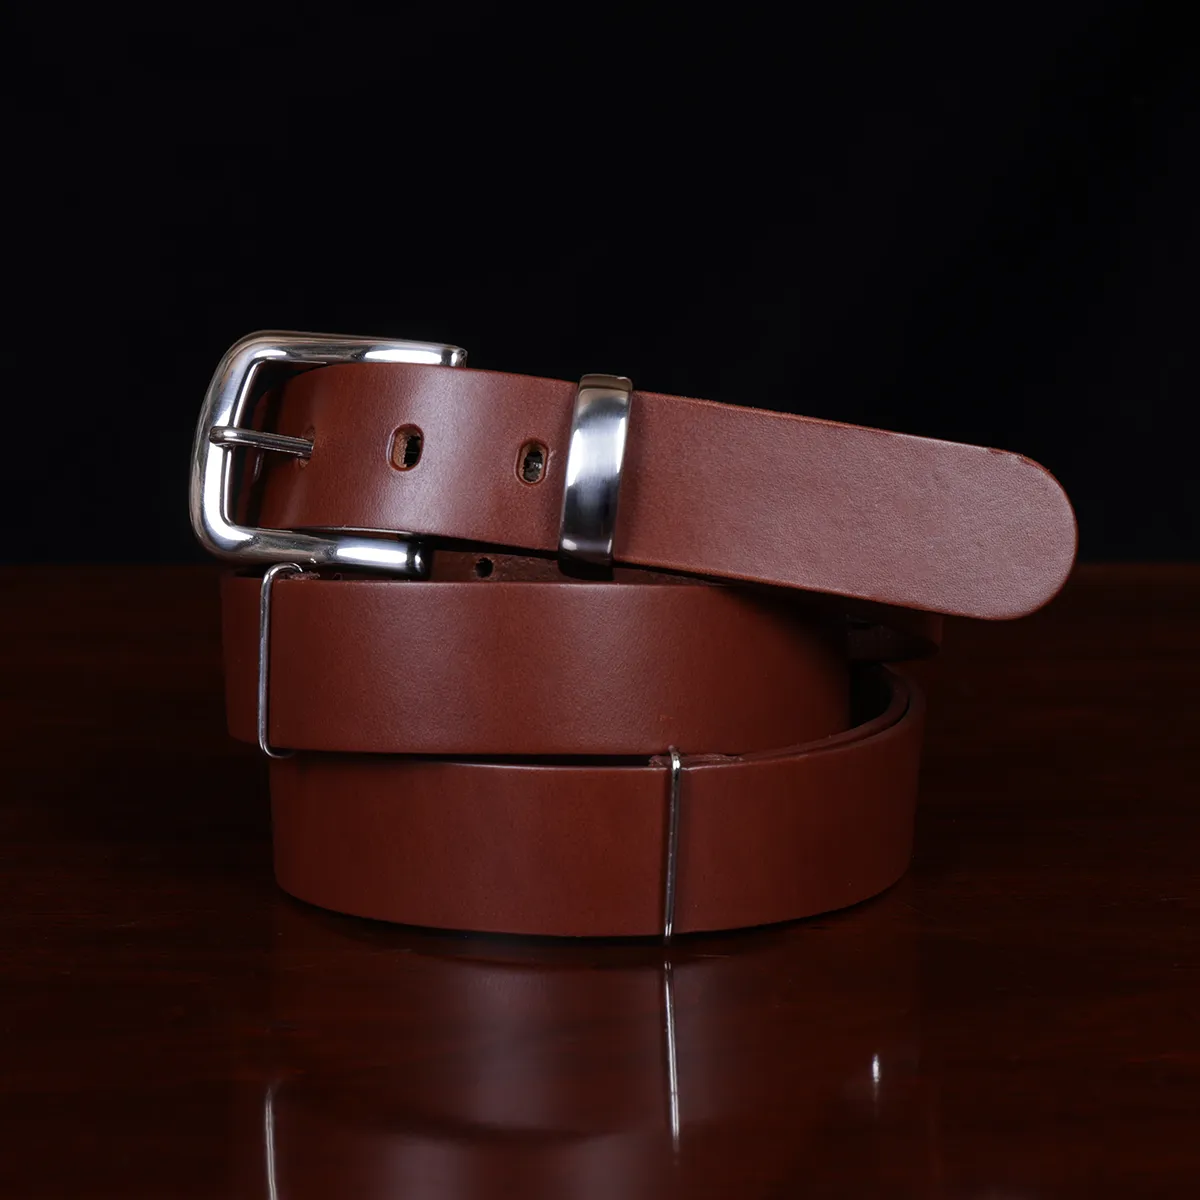 Leather Men's Adjustable Belt, Style NO.4, Full-Grain Brown Italian Bridle Leather, Nickel-finish Hardware, Size XL - Made in USA by Colonel Littleton